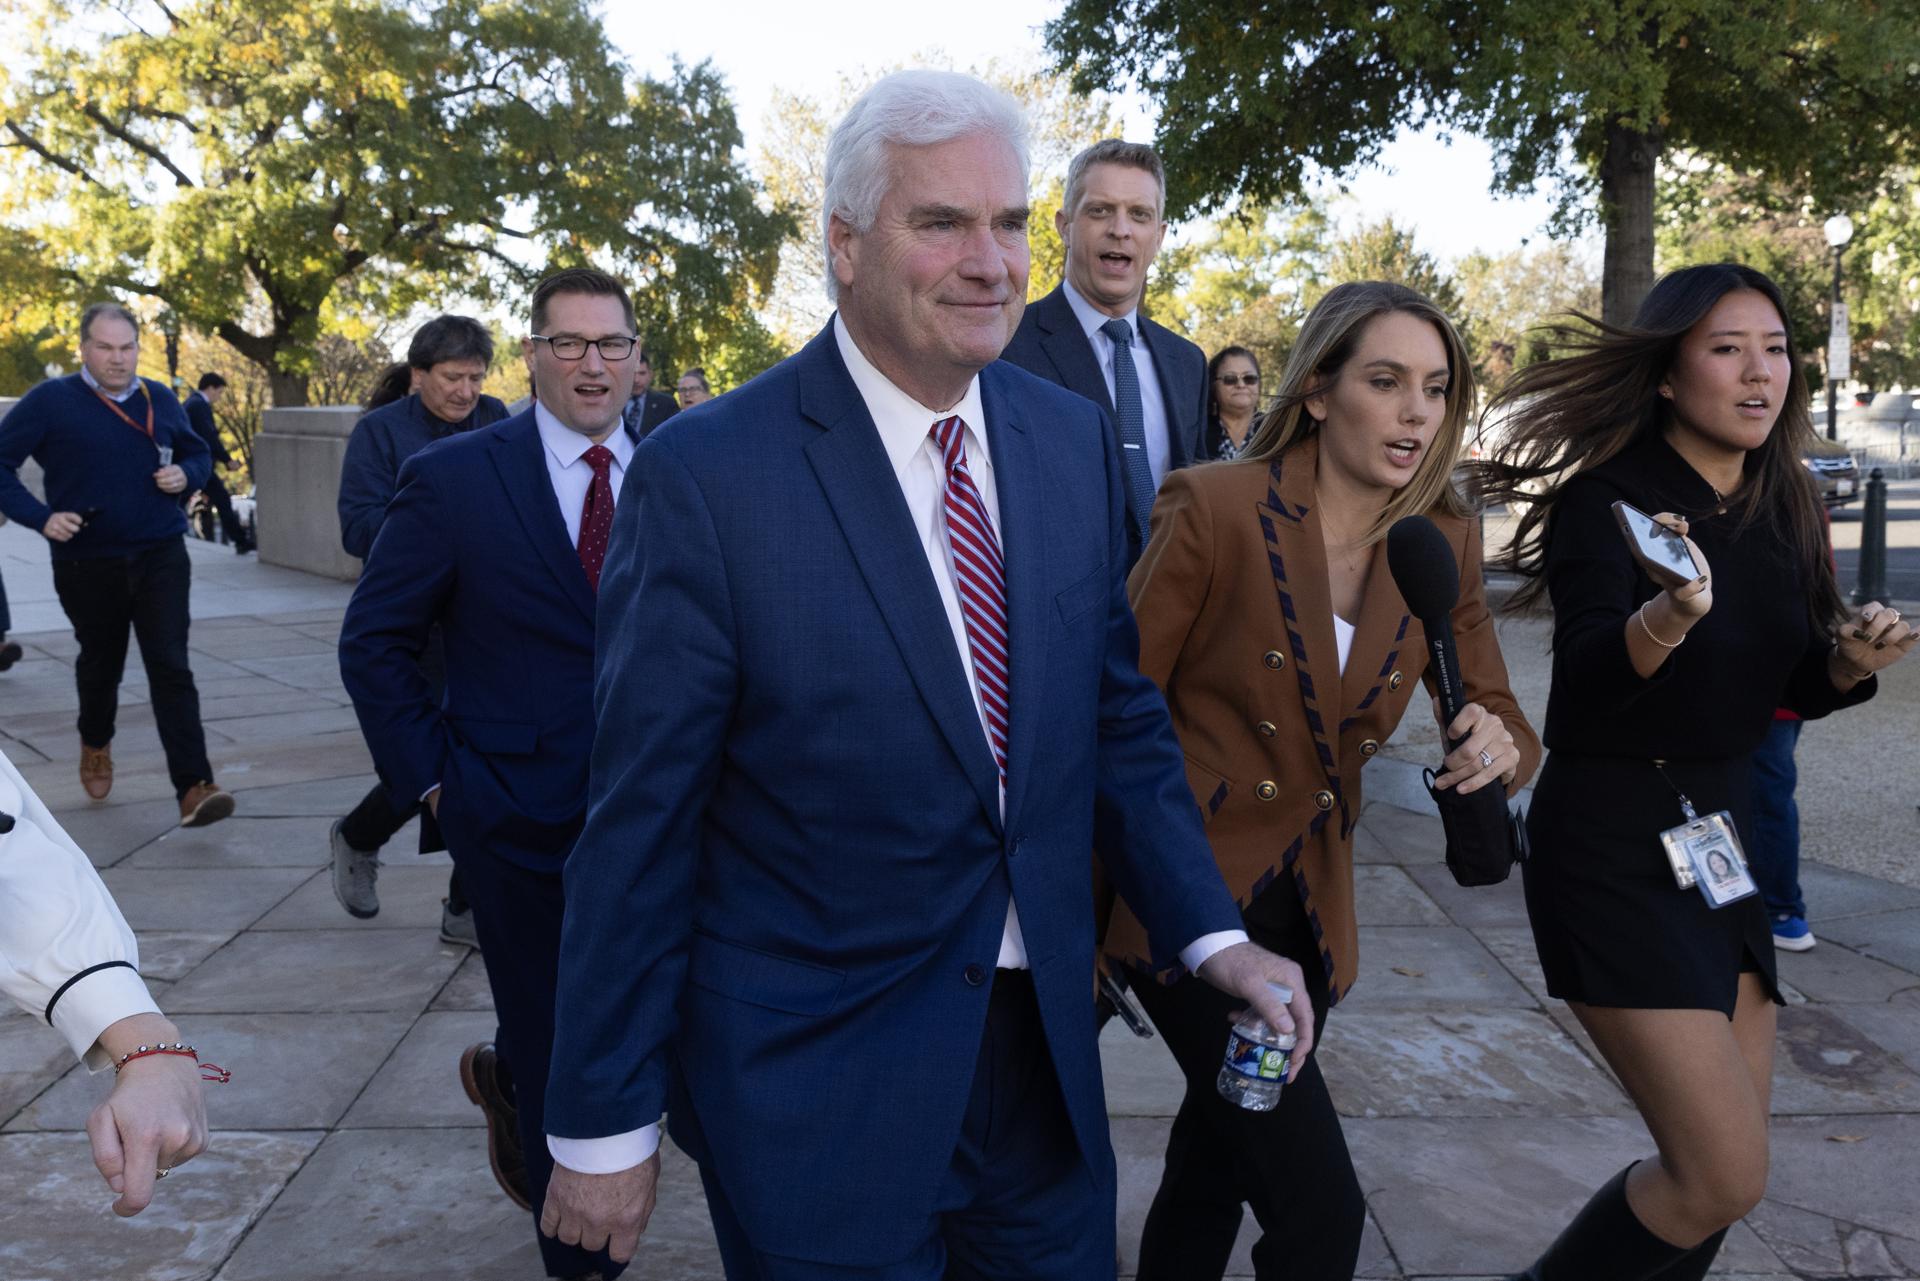 Republican Representative of Minnesota Tom Emmer (C) is followed by members of the news media as he leaves after withdrawing his name as a candidate for House Speaker in a closed-door meeting of House Republicans, on Capitol Hill in Washington, DC, USA, 24 October 2023. EFE/EPA/MICHAEL REYNOLDS